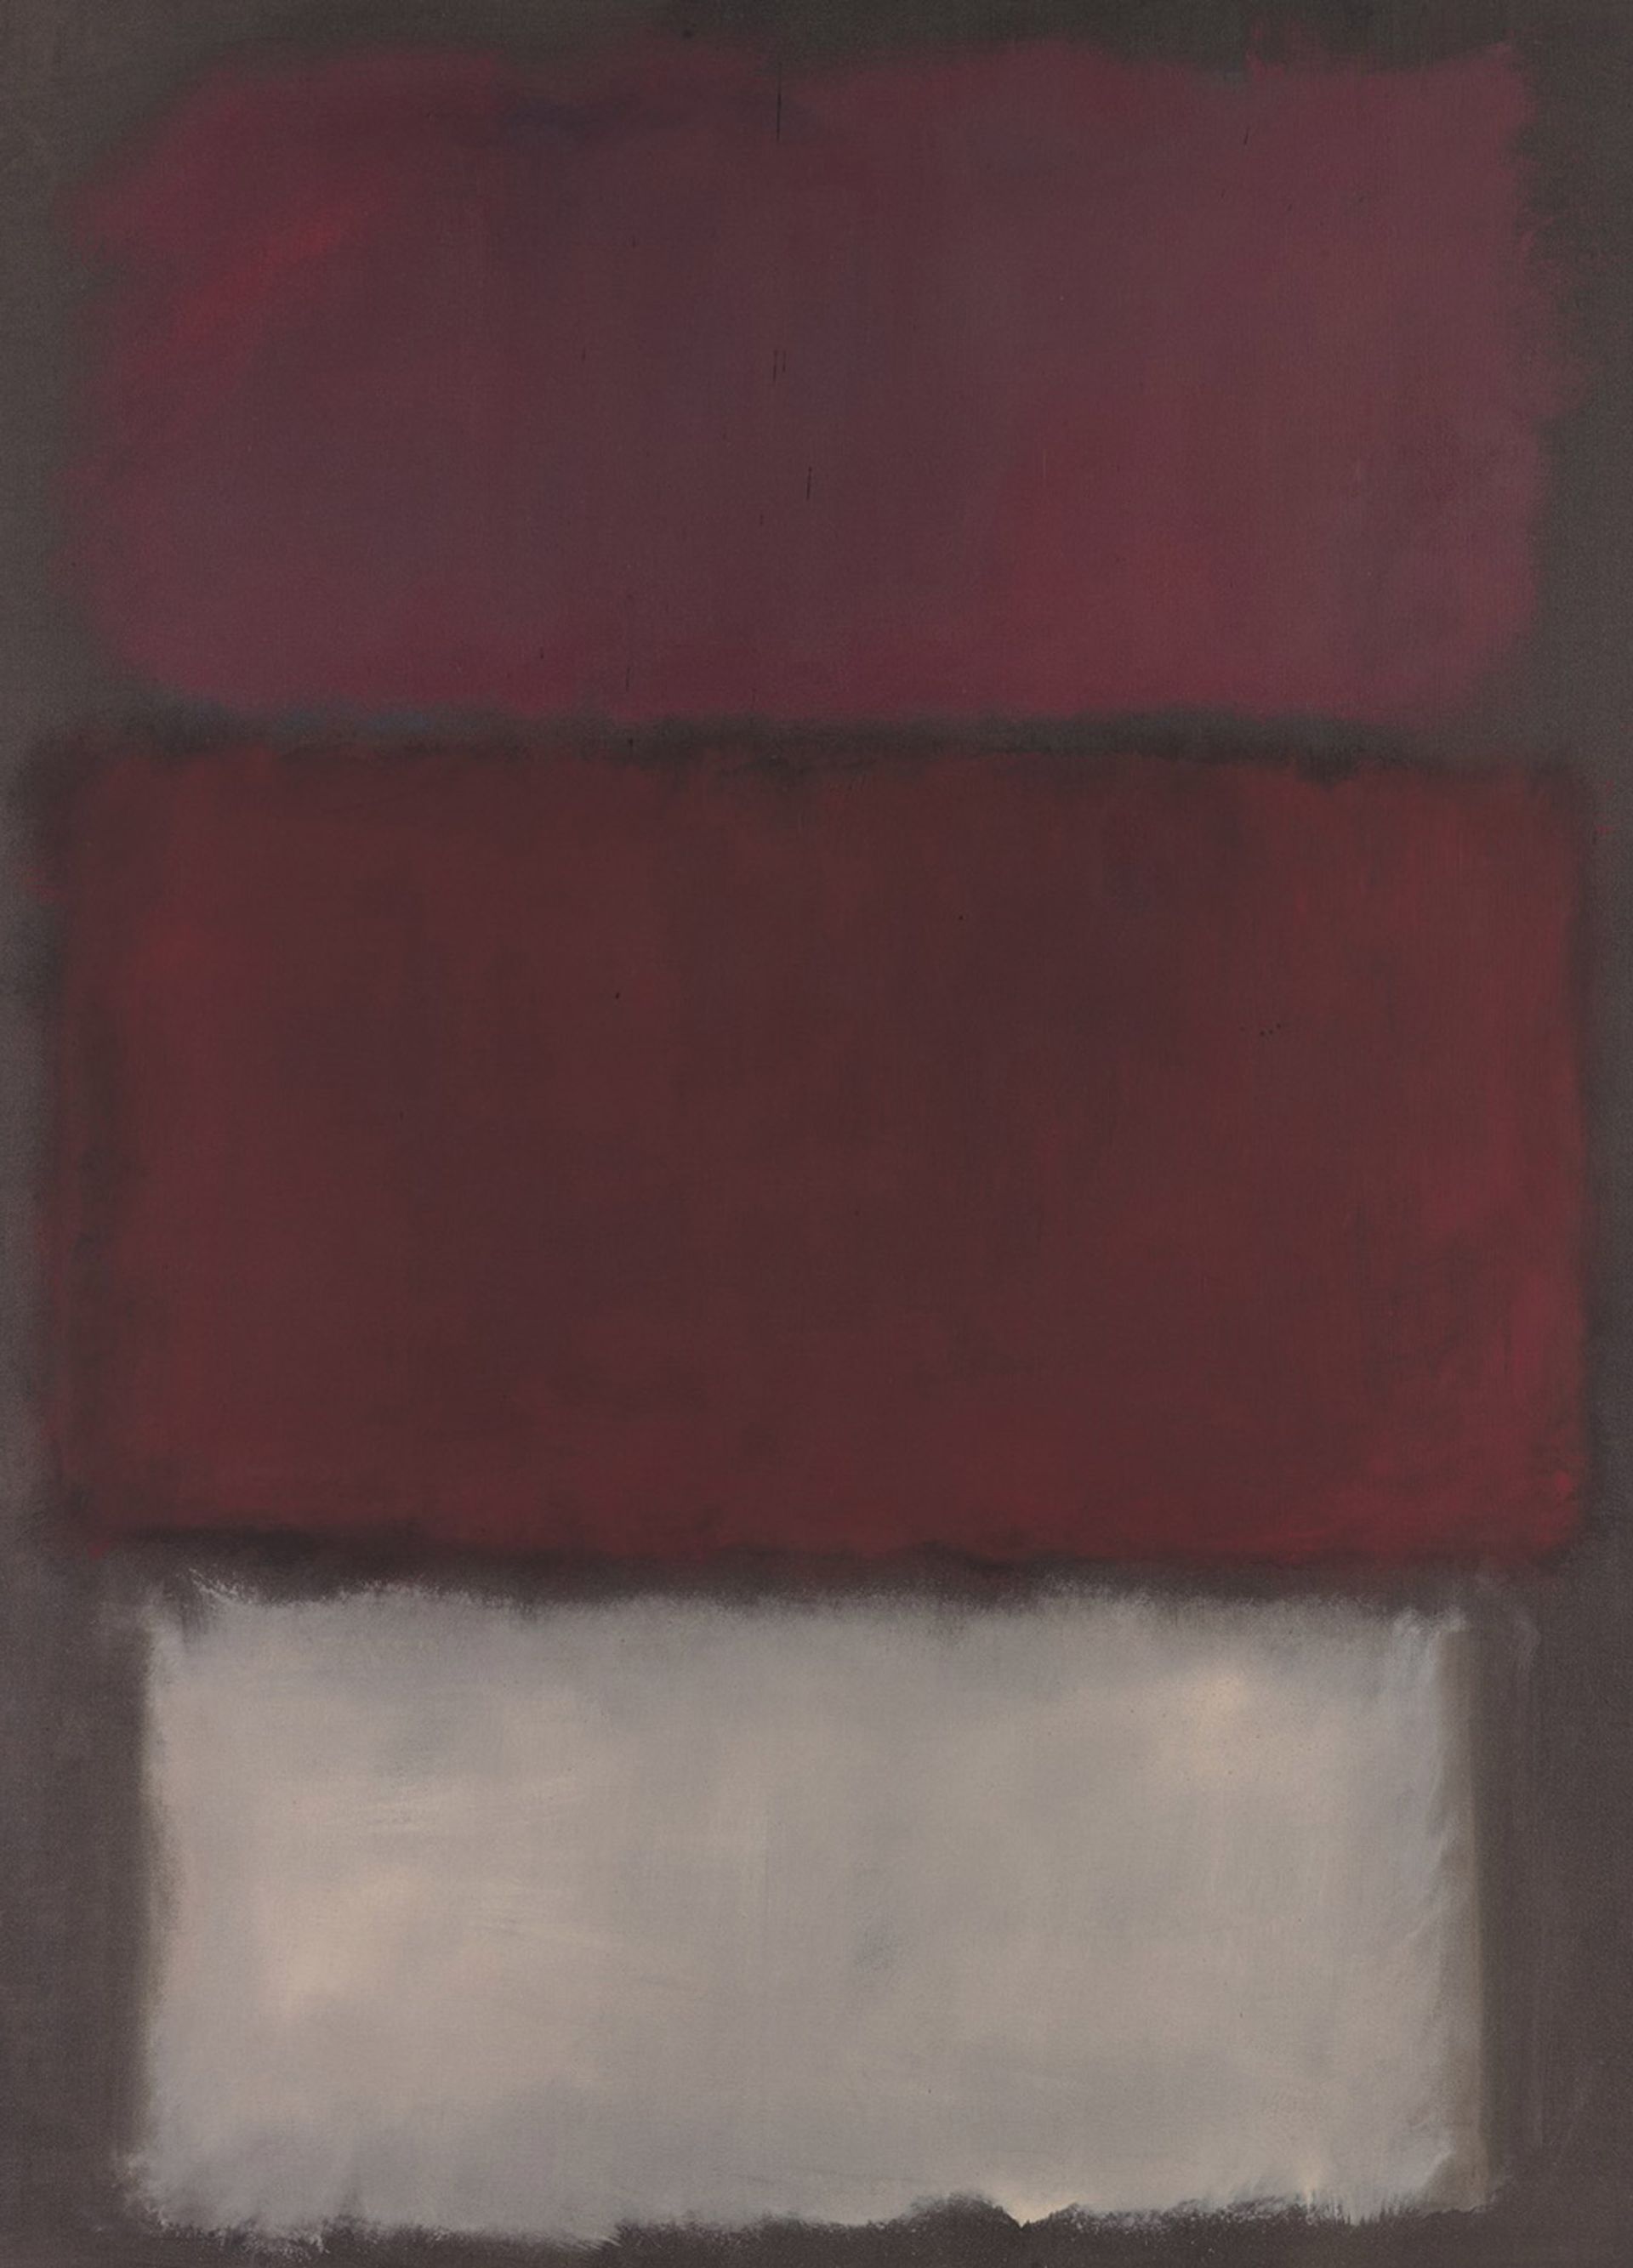 SFMoMA is selling Rothko’s Untitled (1960)—acquired in discussion with the artist—in order to support the diversification of its collection. Photo courtesy of Sotheby’s; © 1998 Kate Rothko Prizel and Christopher Rothko/Artists Rights Society